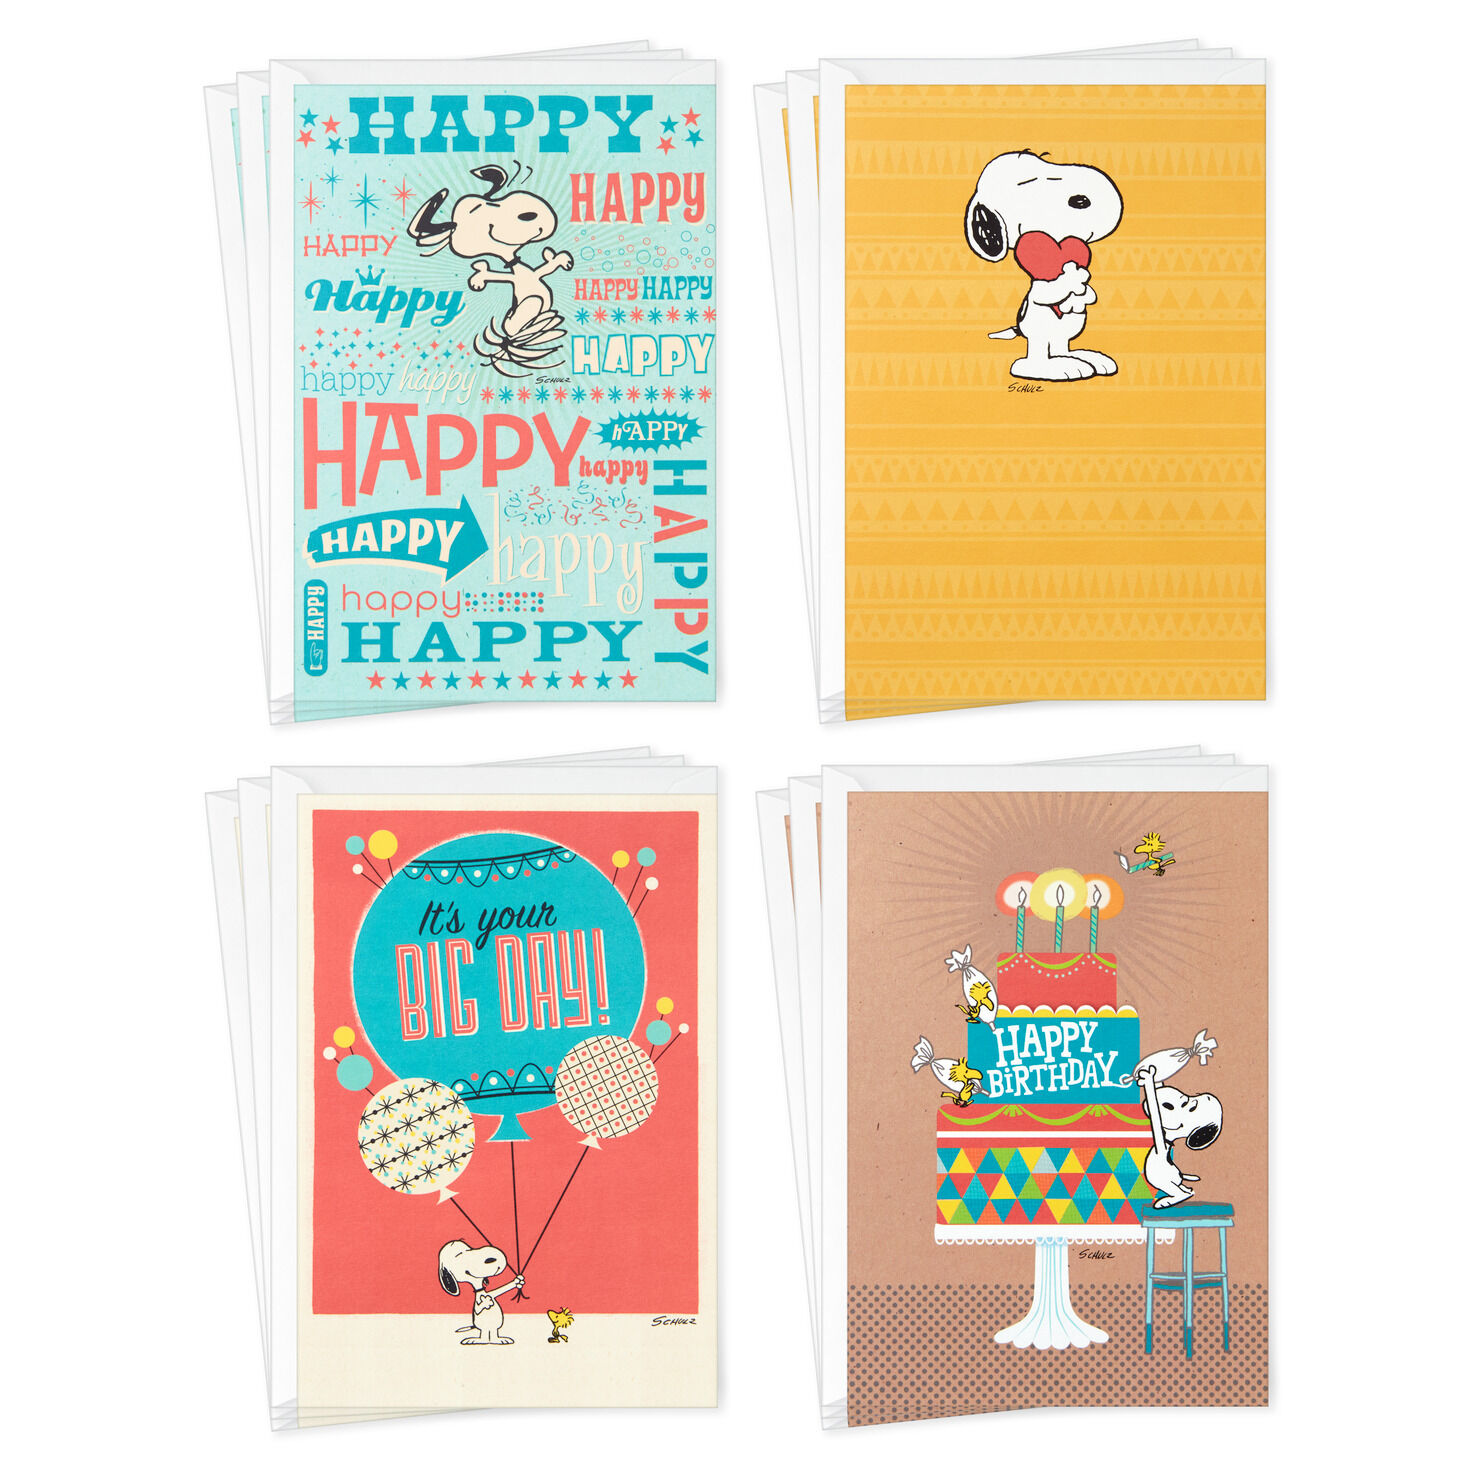 SNOOPY TAKE MY HAND AND WE WILL GET THROUGH THIS TOGETHER GREETING CARD 